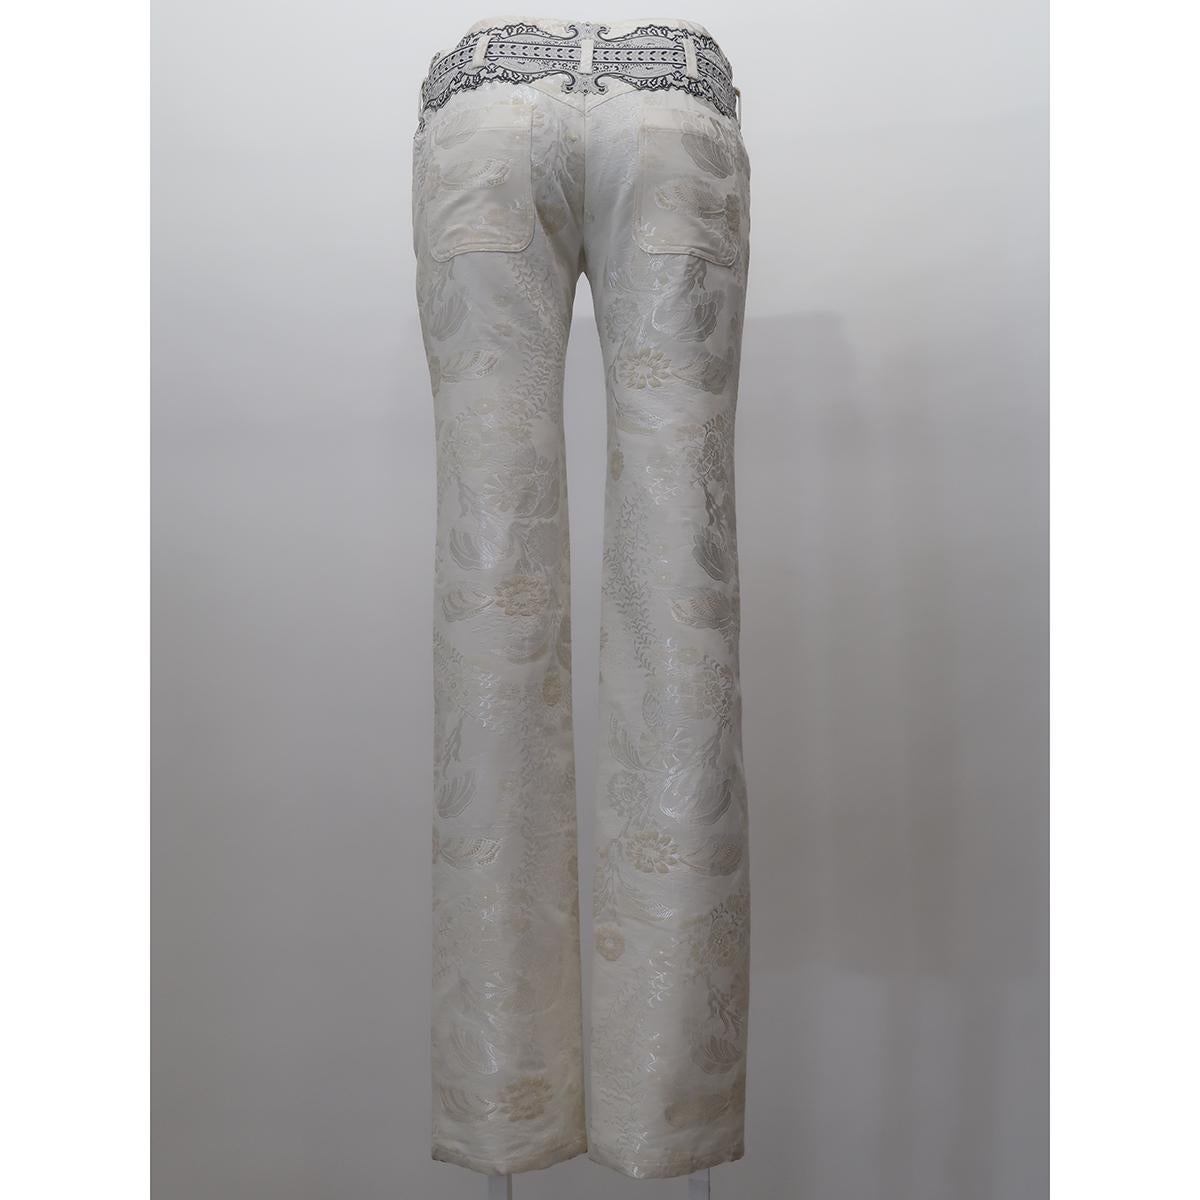 Balenciaga by Nicolas Ghesquière SS-2006 Wool & Cotton Trousers In Excellent Condition For Sale In Brussels, BE